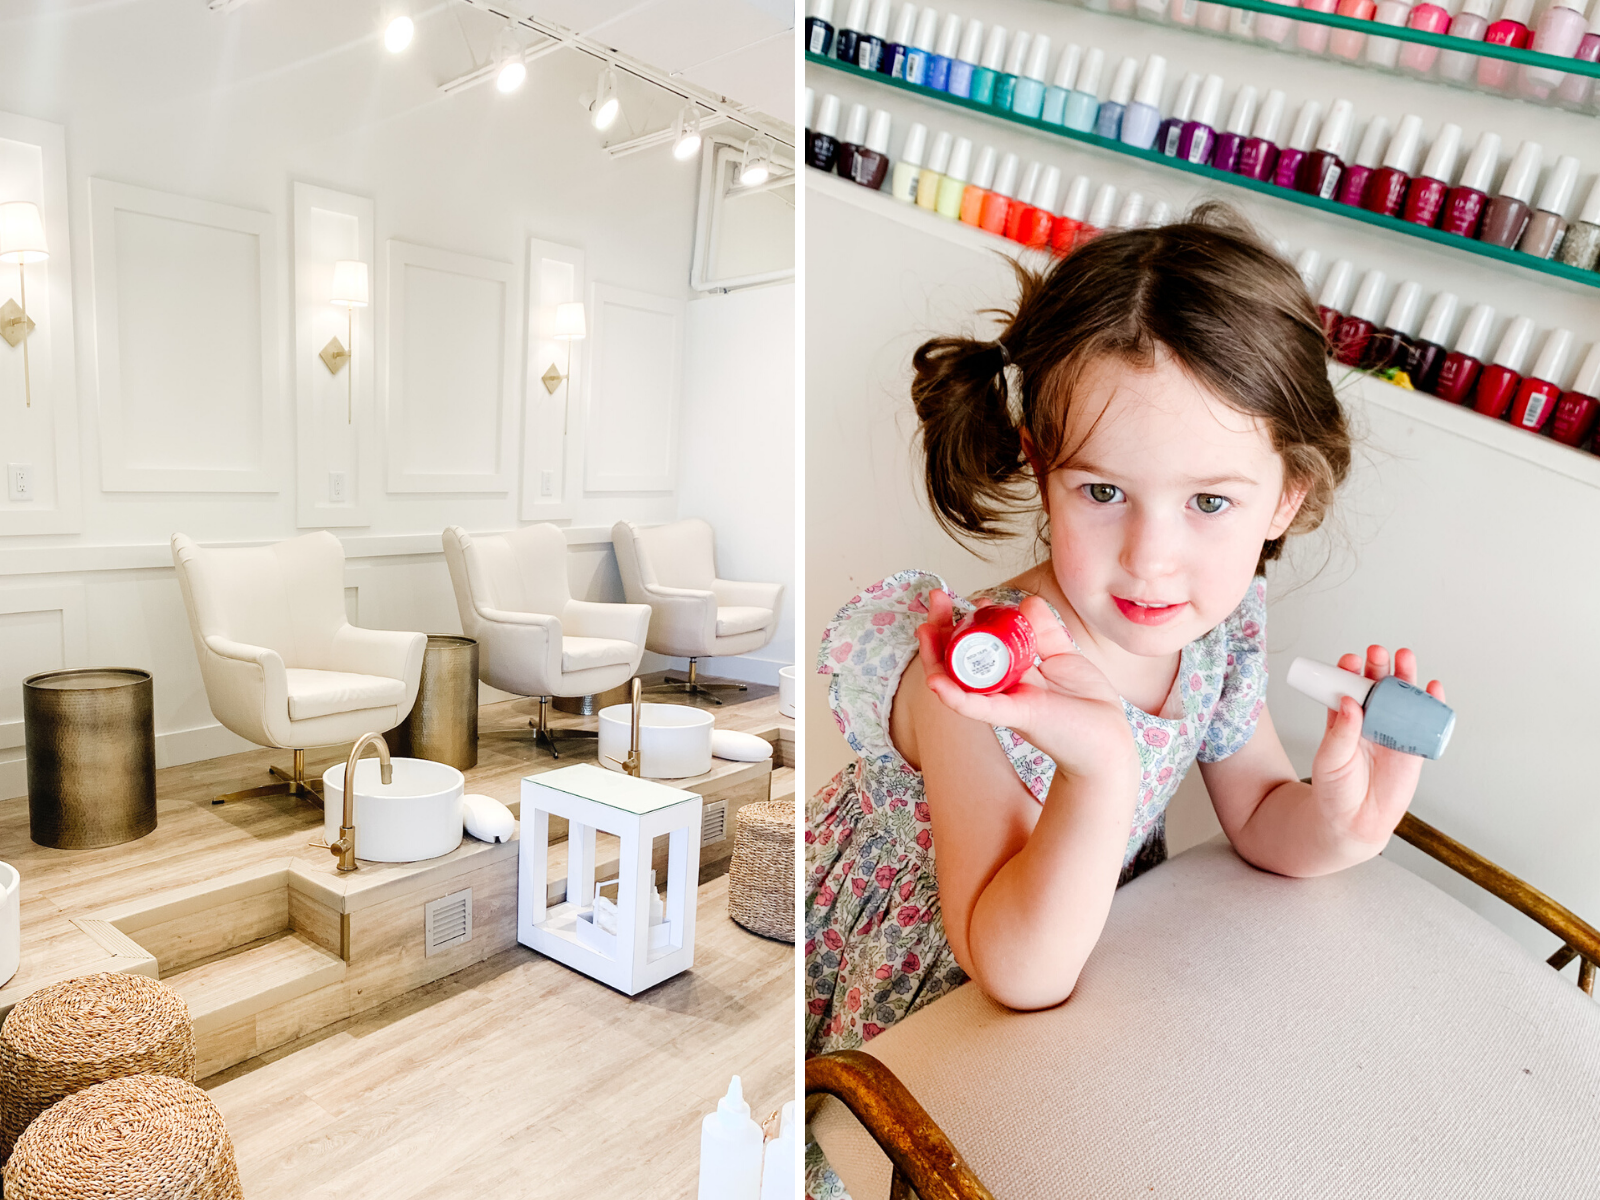 Things to do in Columbia SC by popular Memphis travel blog, Lone Star Looking Glass: image of a little girl getting a manicure at a nail salon. 